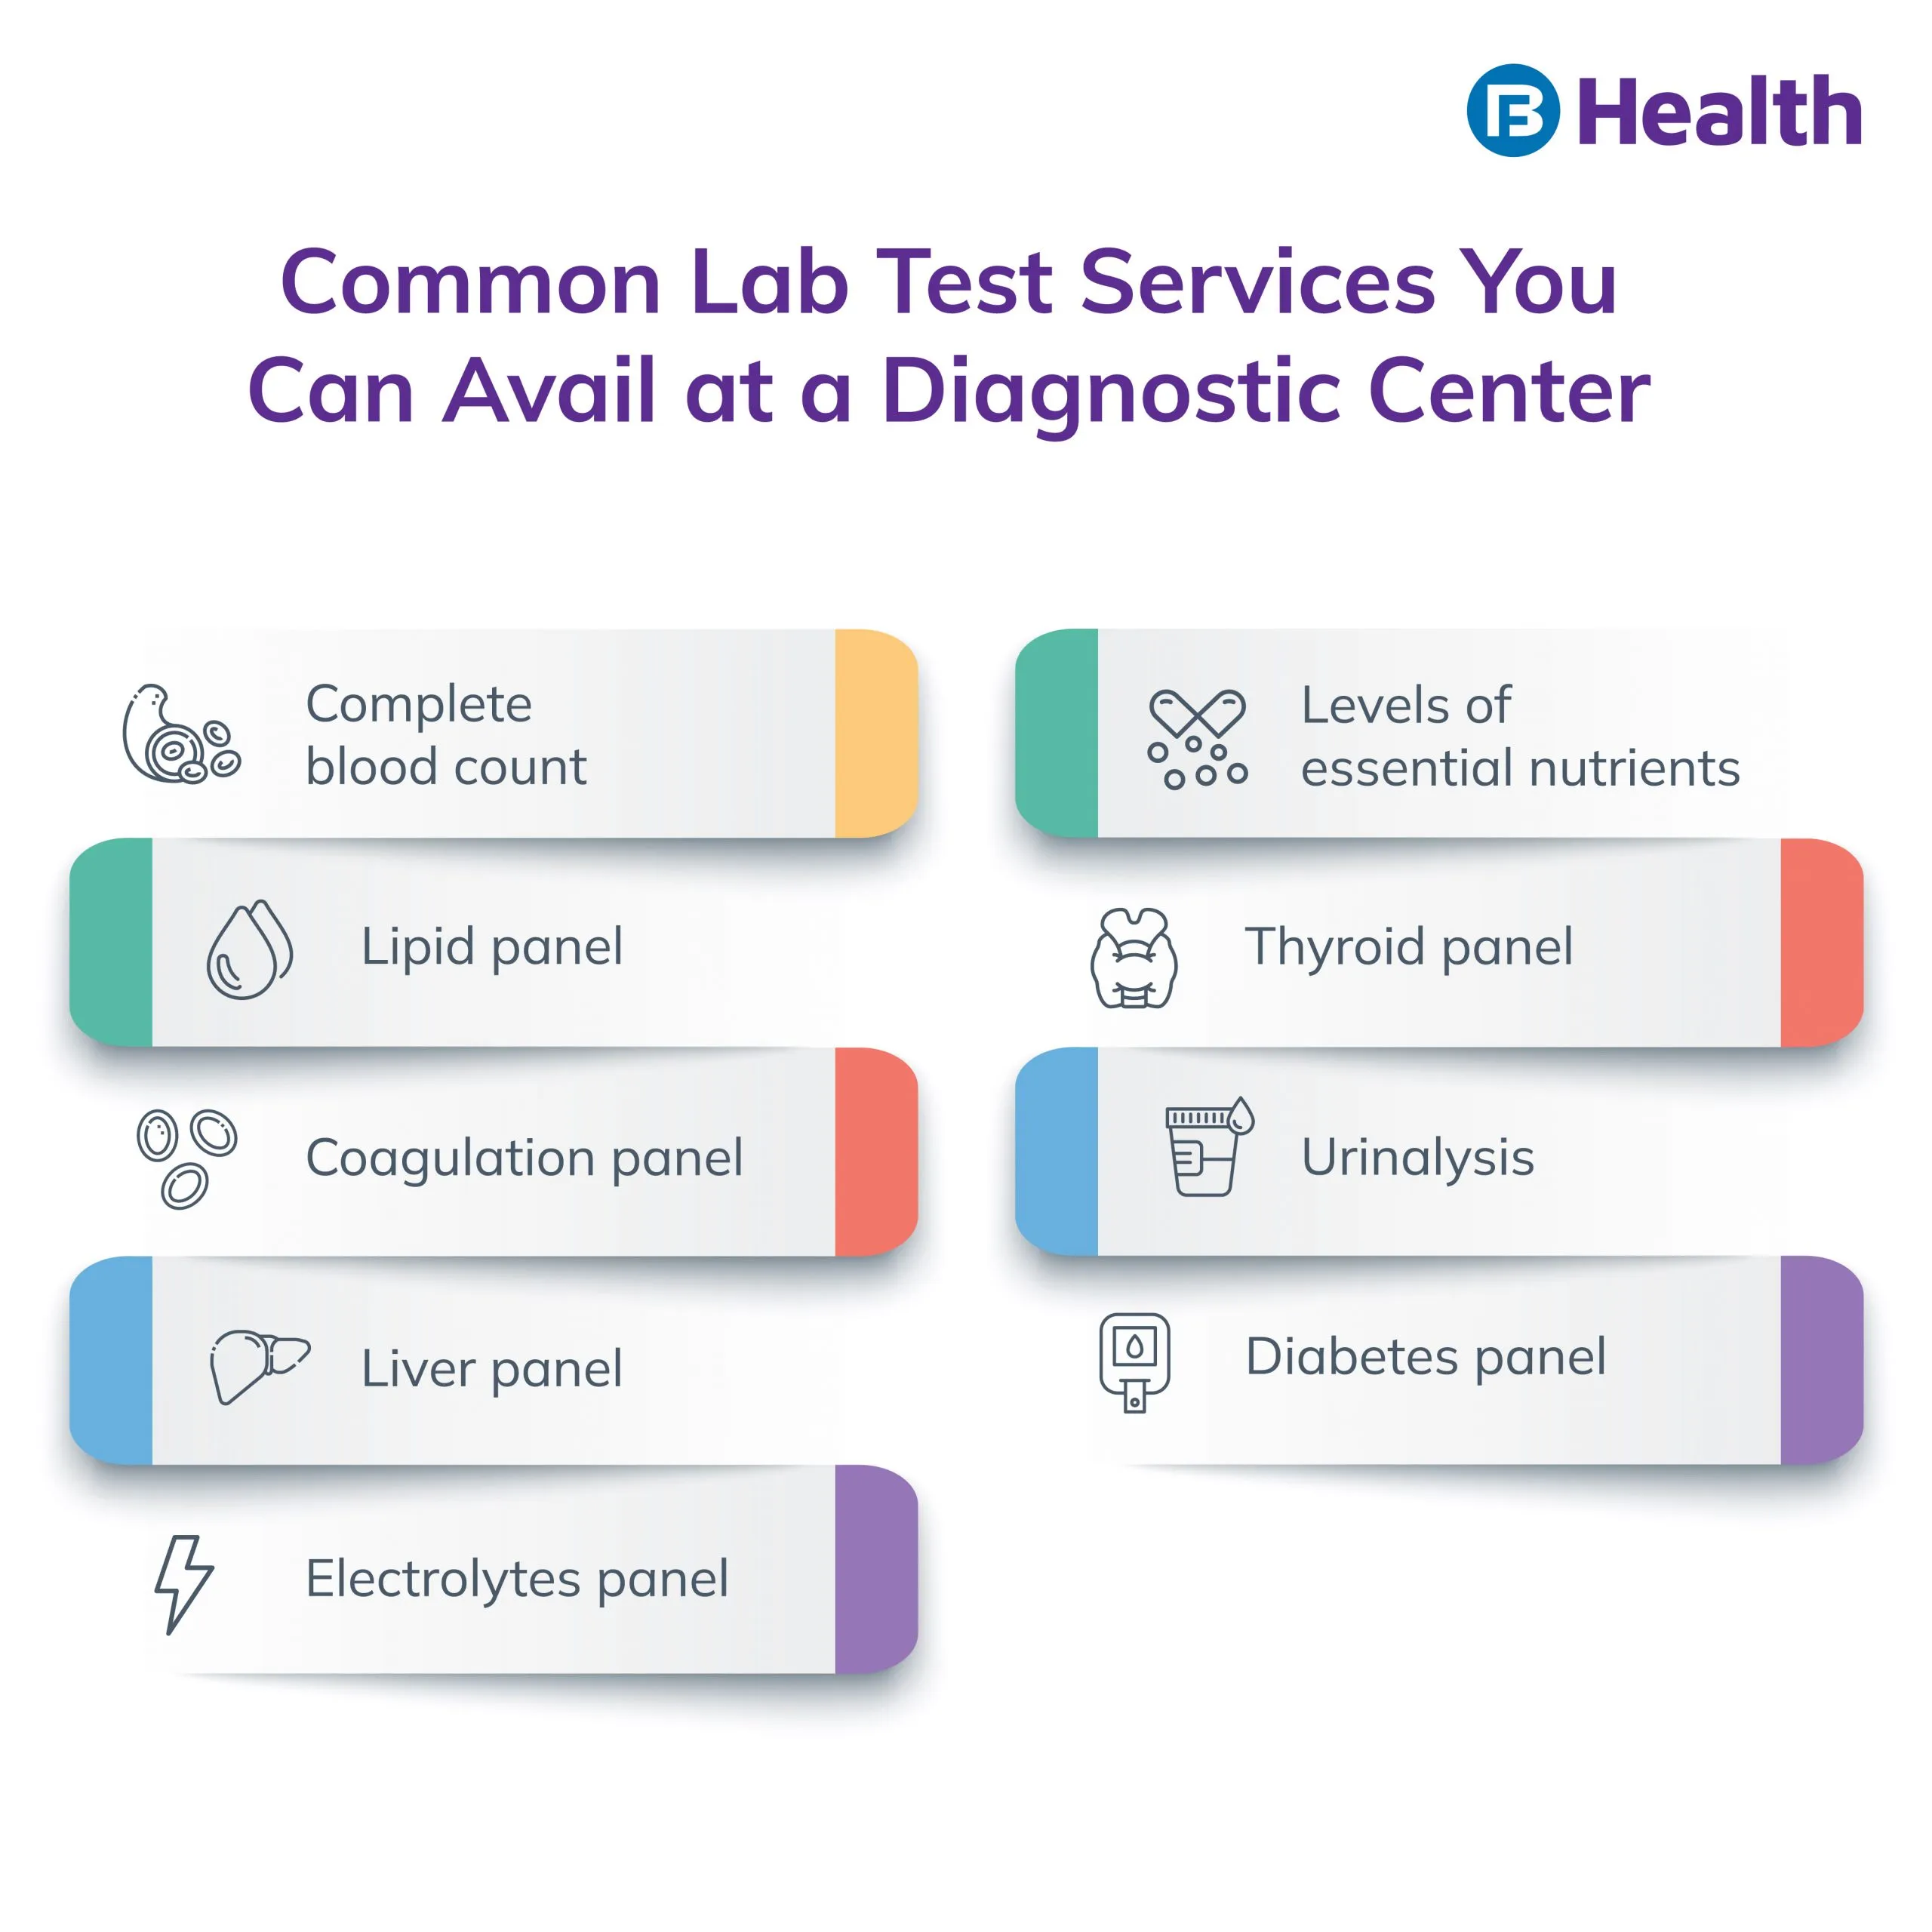 Lab test services provided by diagnostic center Infographic